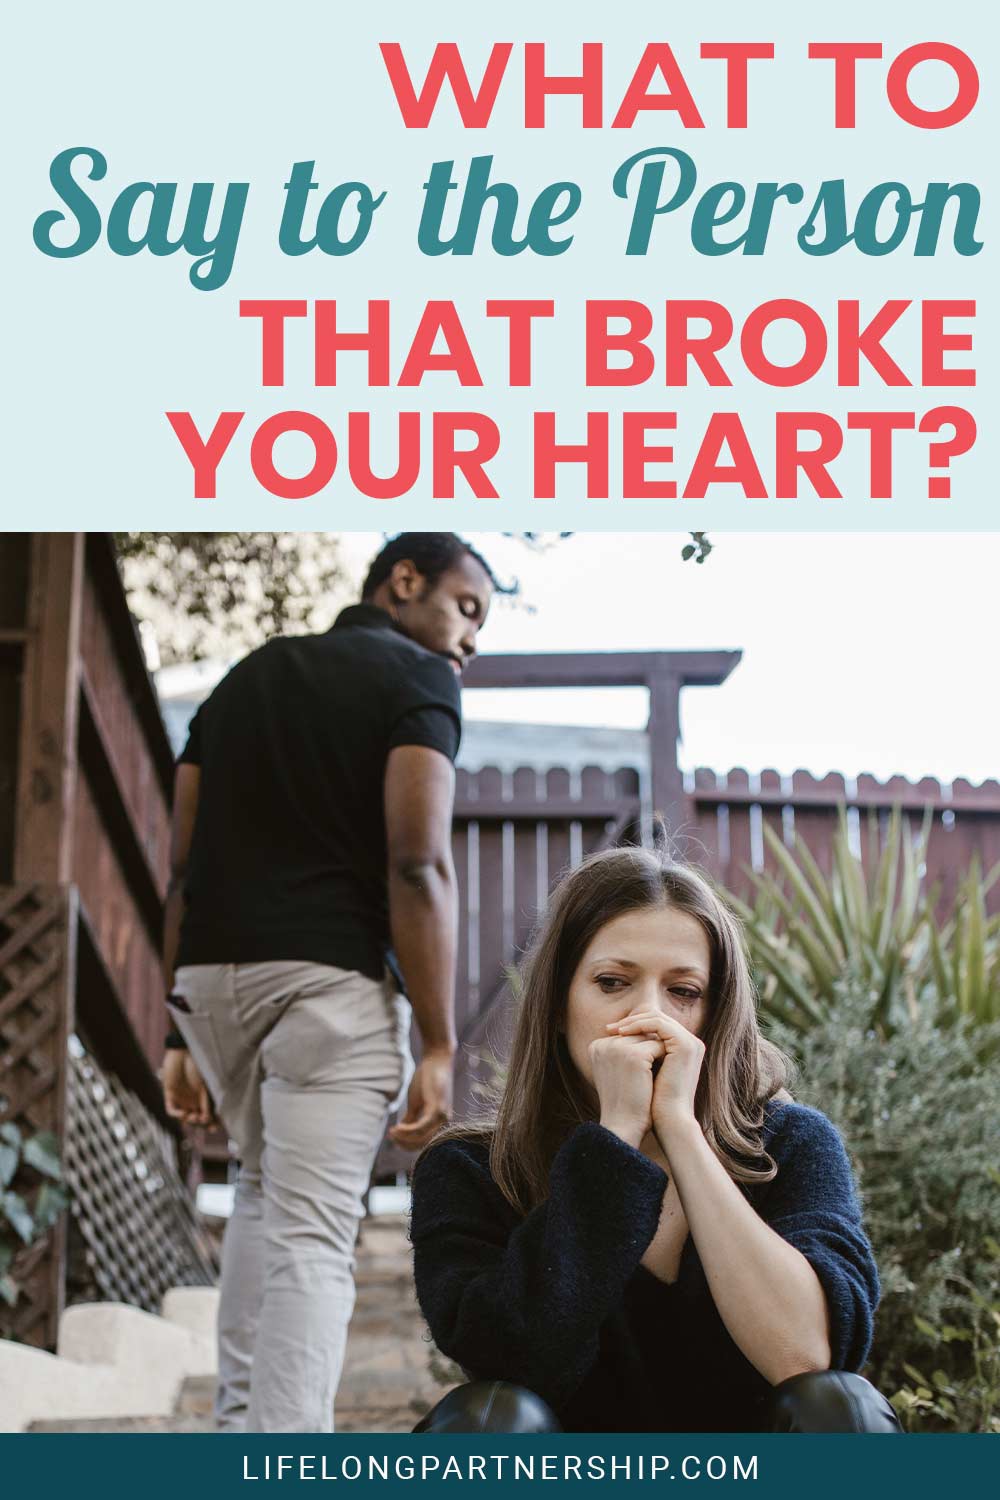 What to Say to the Person That Broke Your Heart?